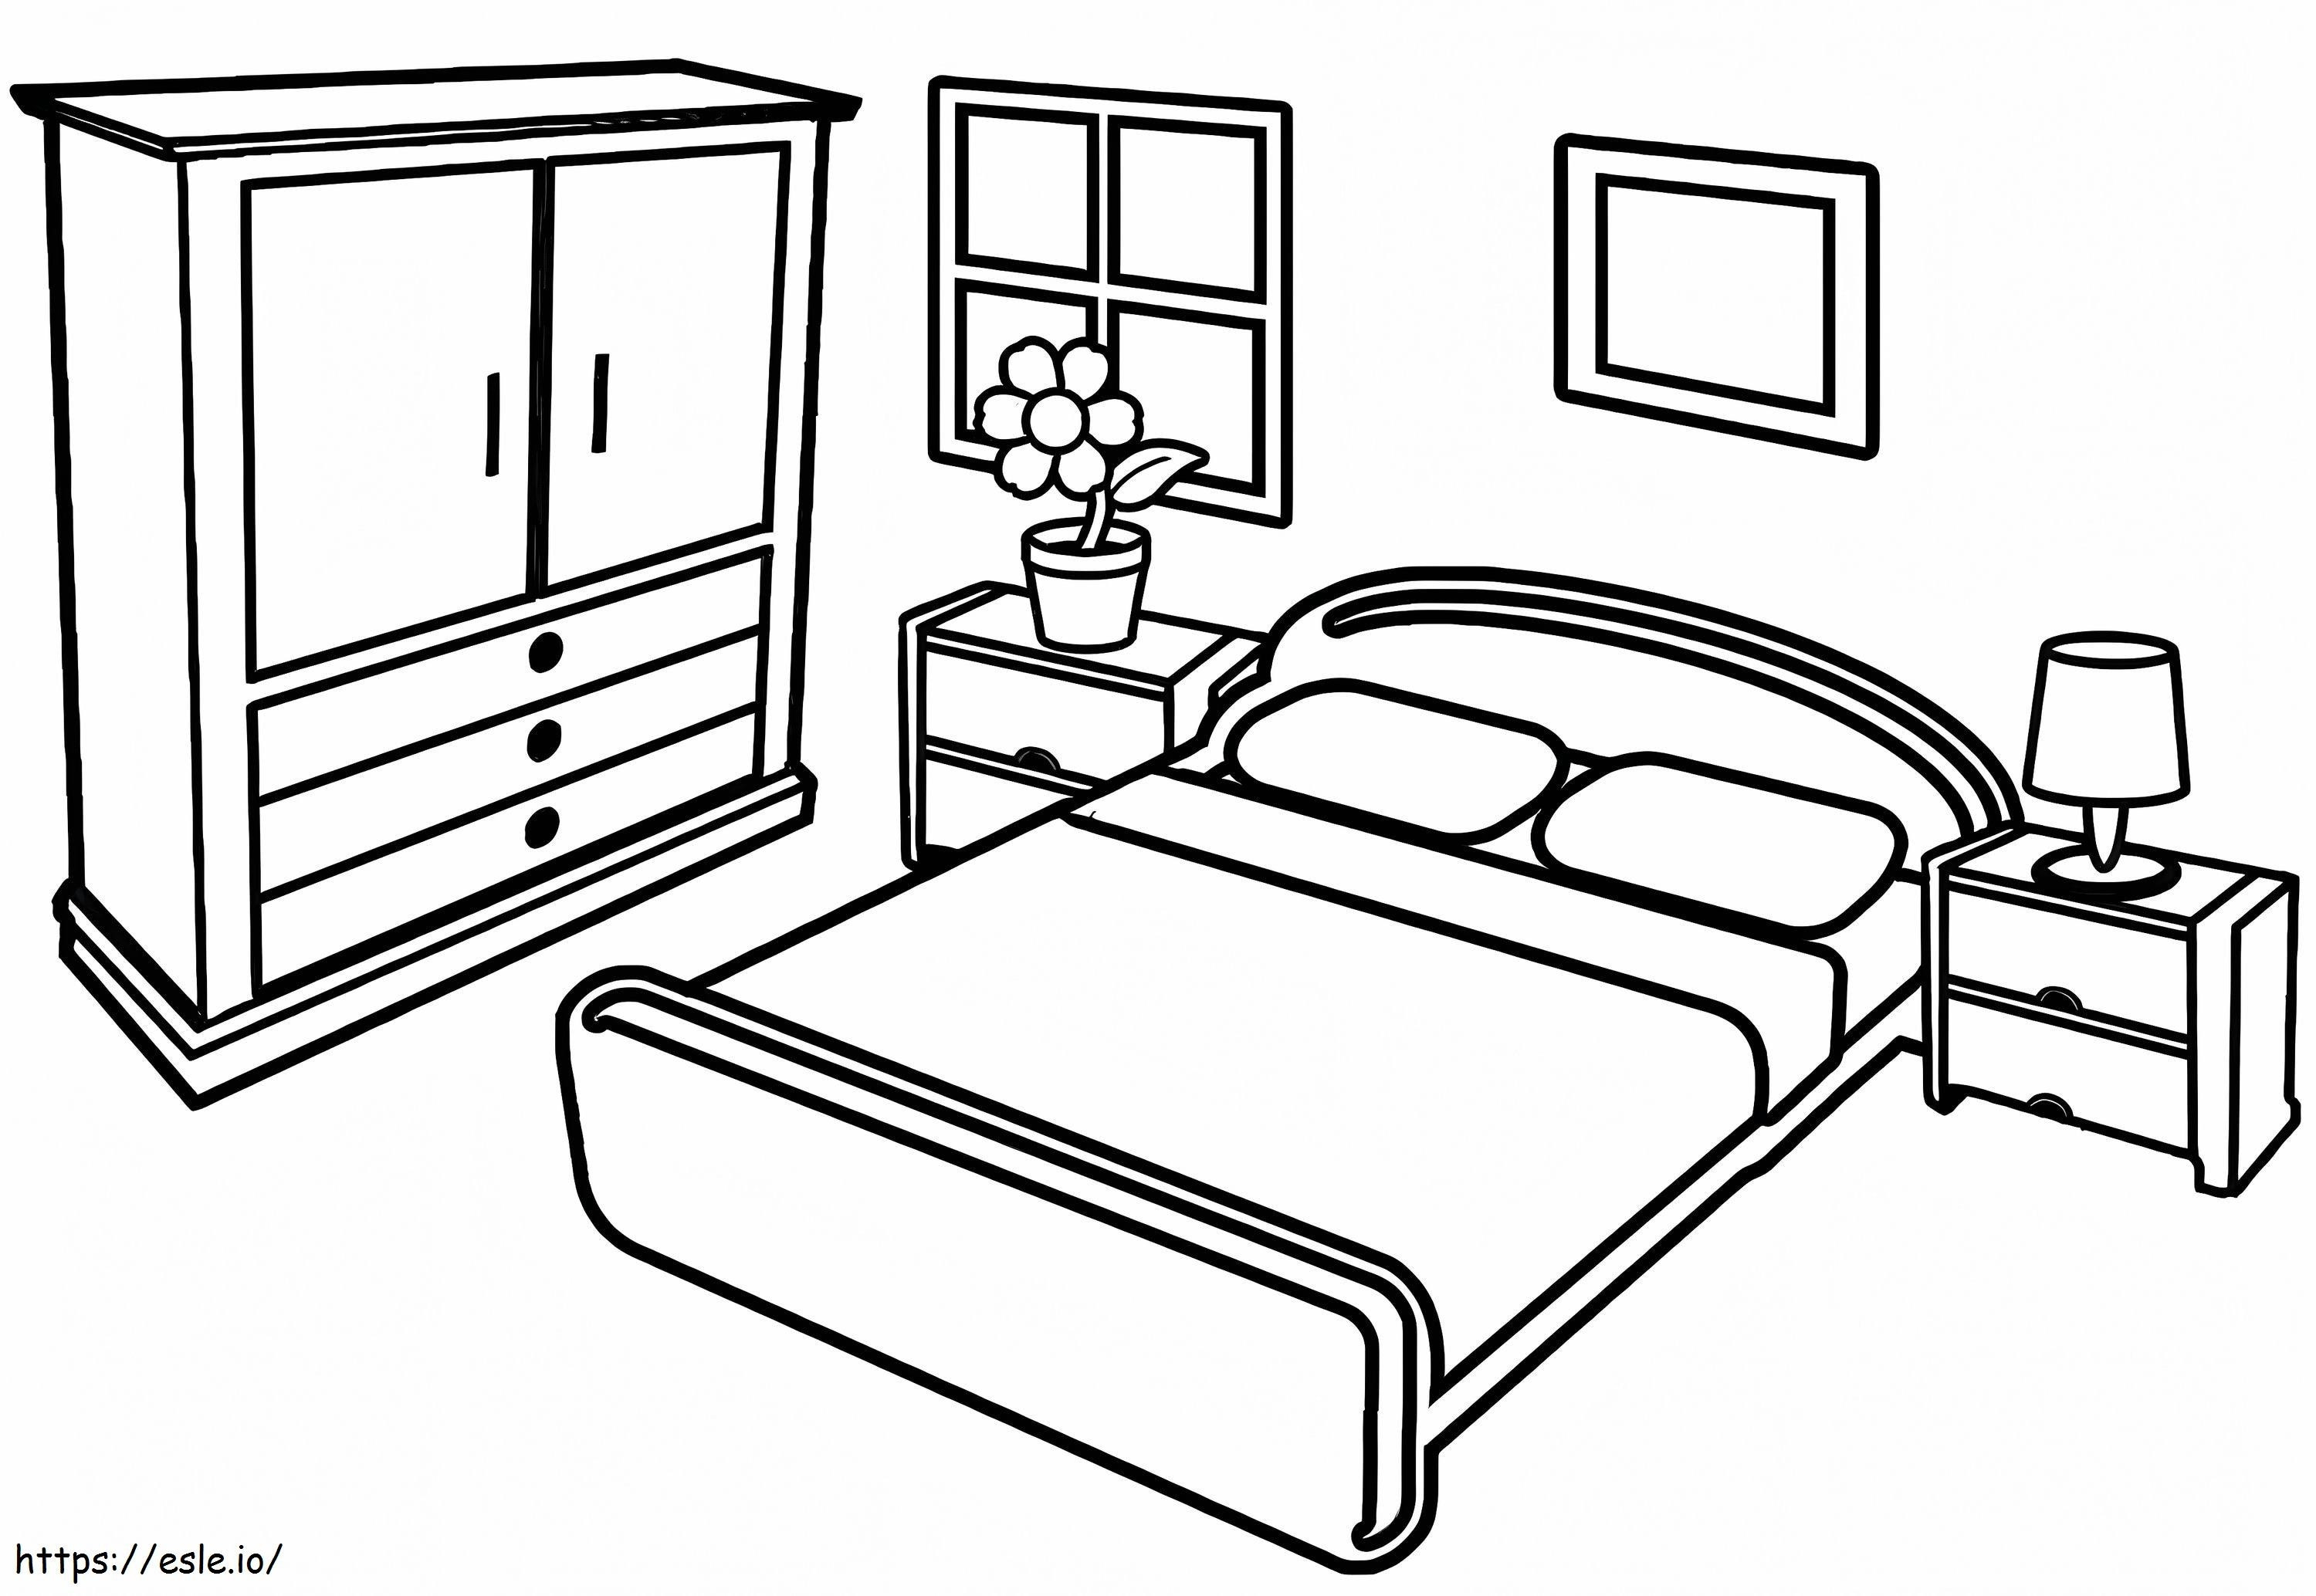 Basic Bedroom coloring page